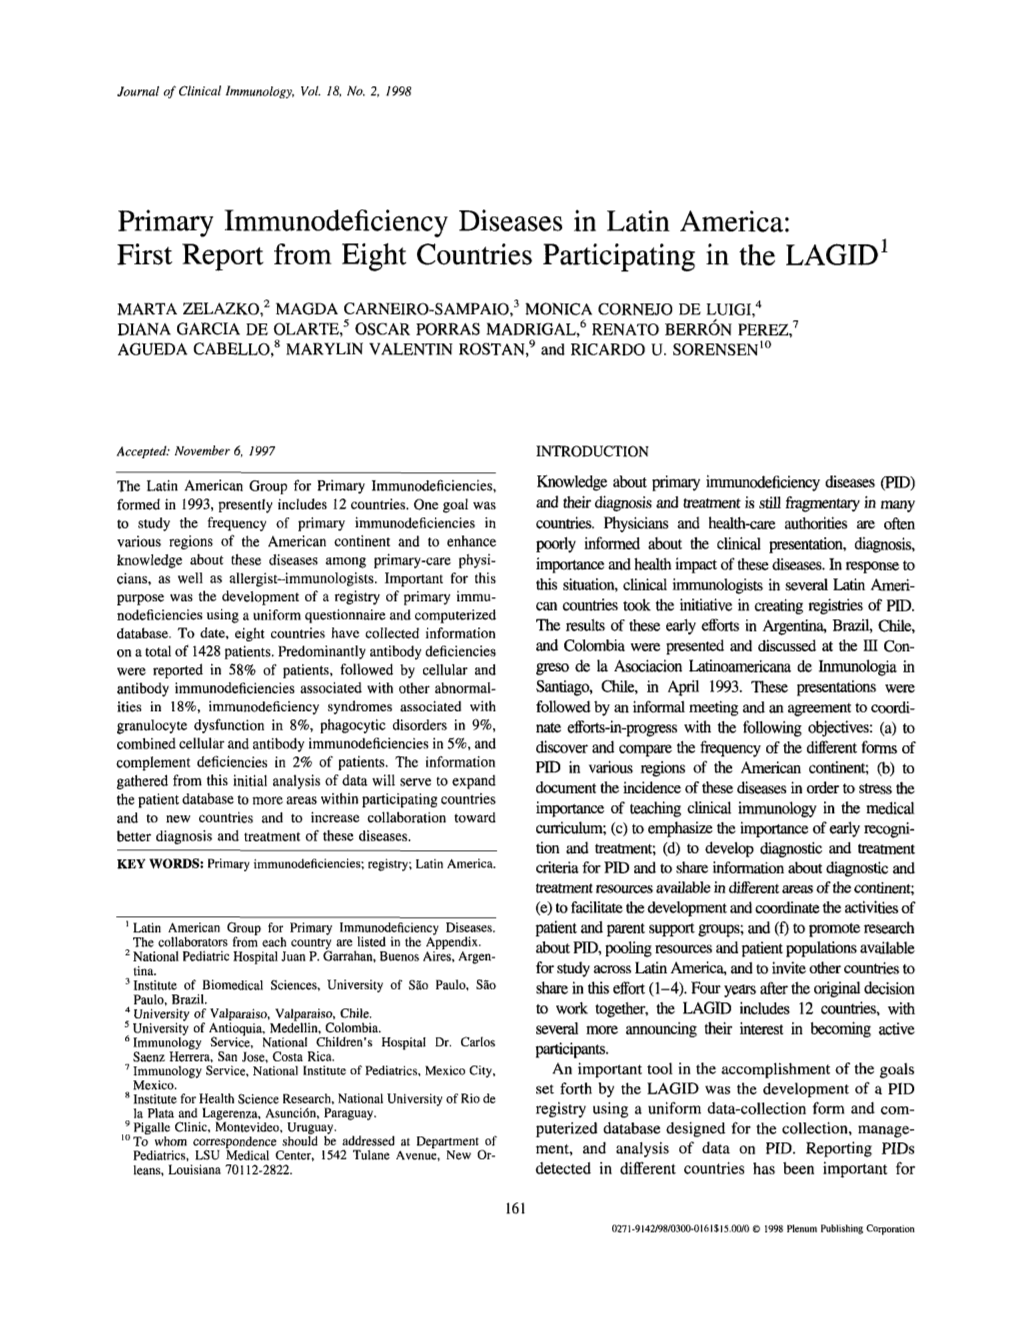 Primary Immunodeficiency Diseases in Latin America: First Report from Eight Countries Participating in the LAGID1